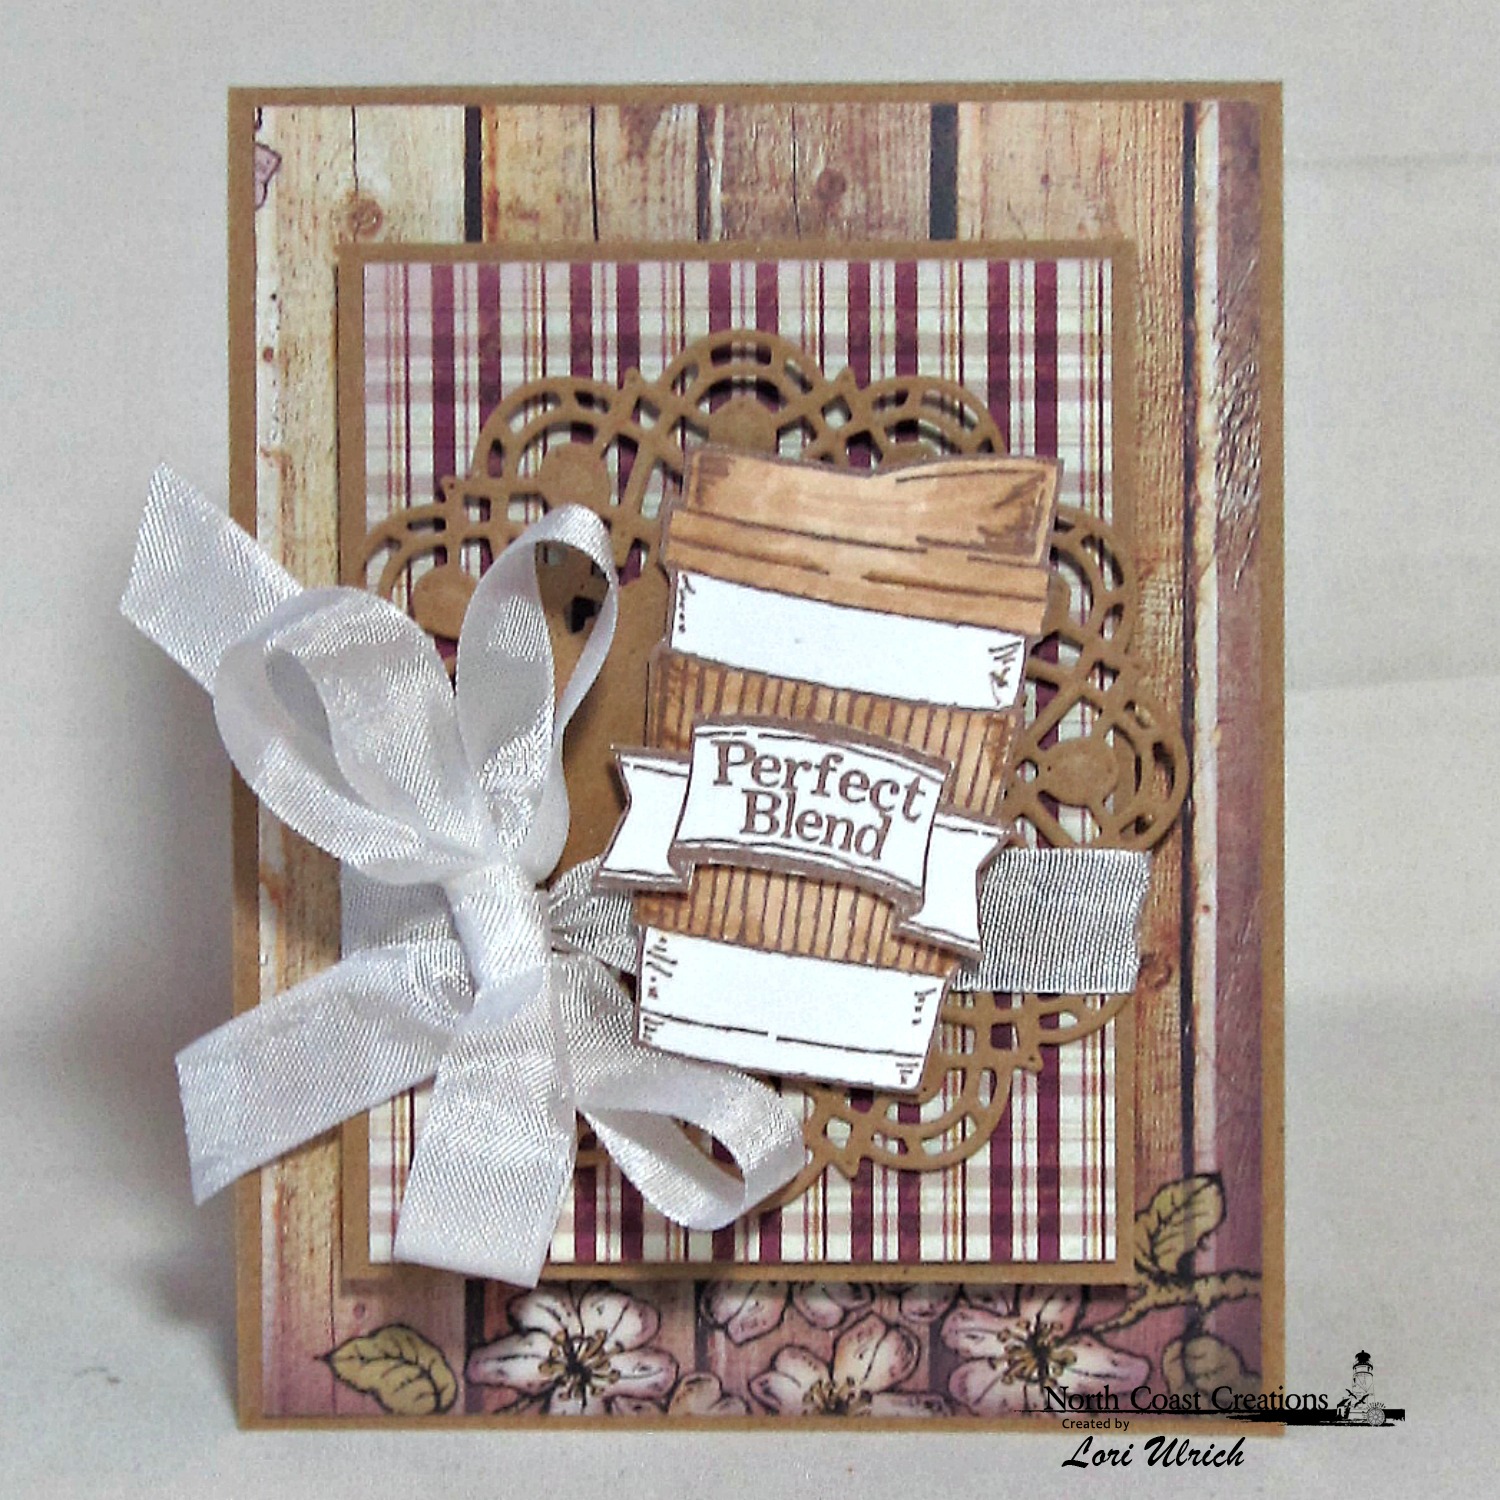 Stamps - North Coast Creations What's Brewin'?, Warm My Heart, Our Daily Bread Designs Custom Doily Dies, ODBD Rustic Beauty Paper Collection